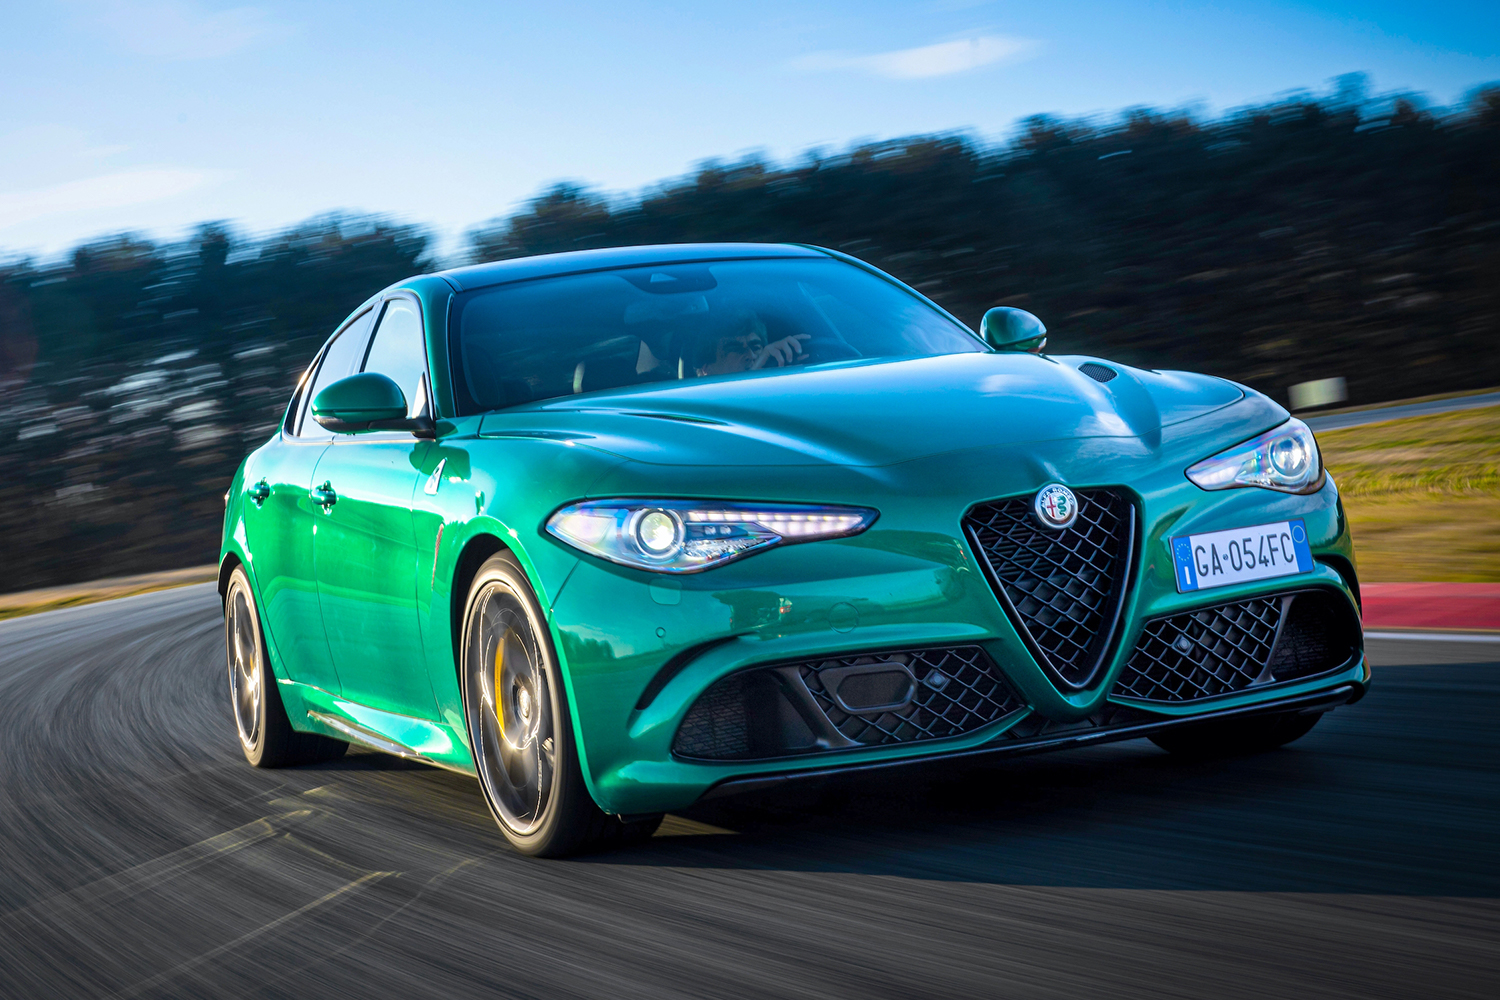 A green 2021 Alfa Romeo Giulia Quadrifoglio turning left around a race track with trees blurred in the background